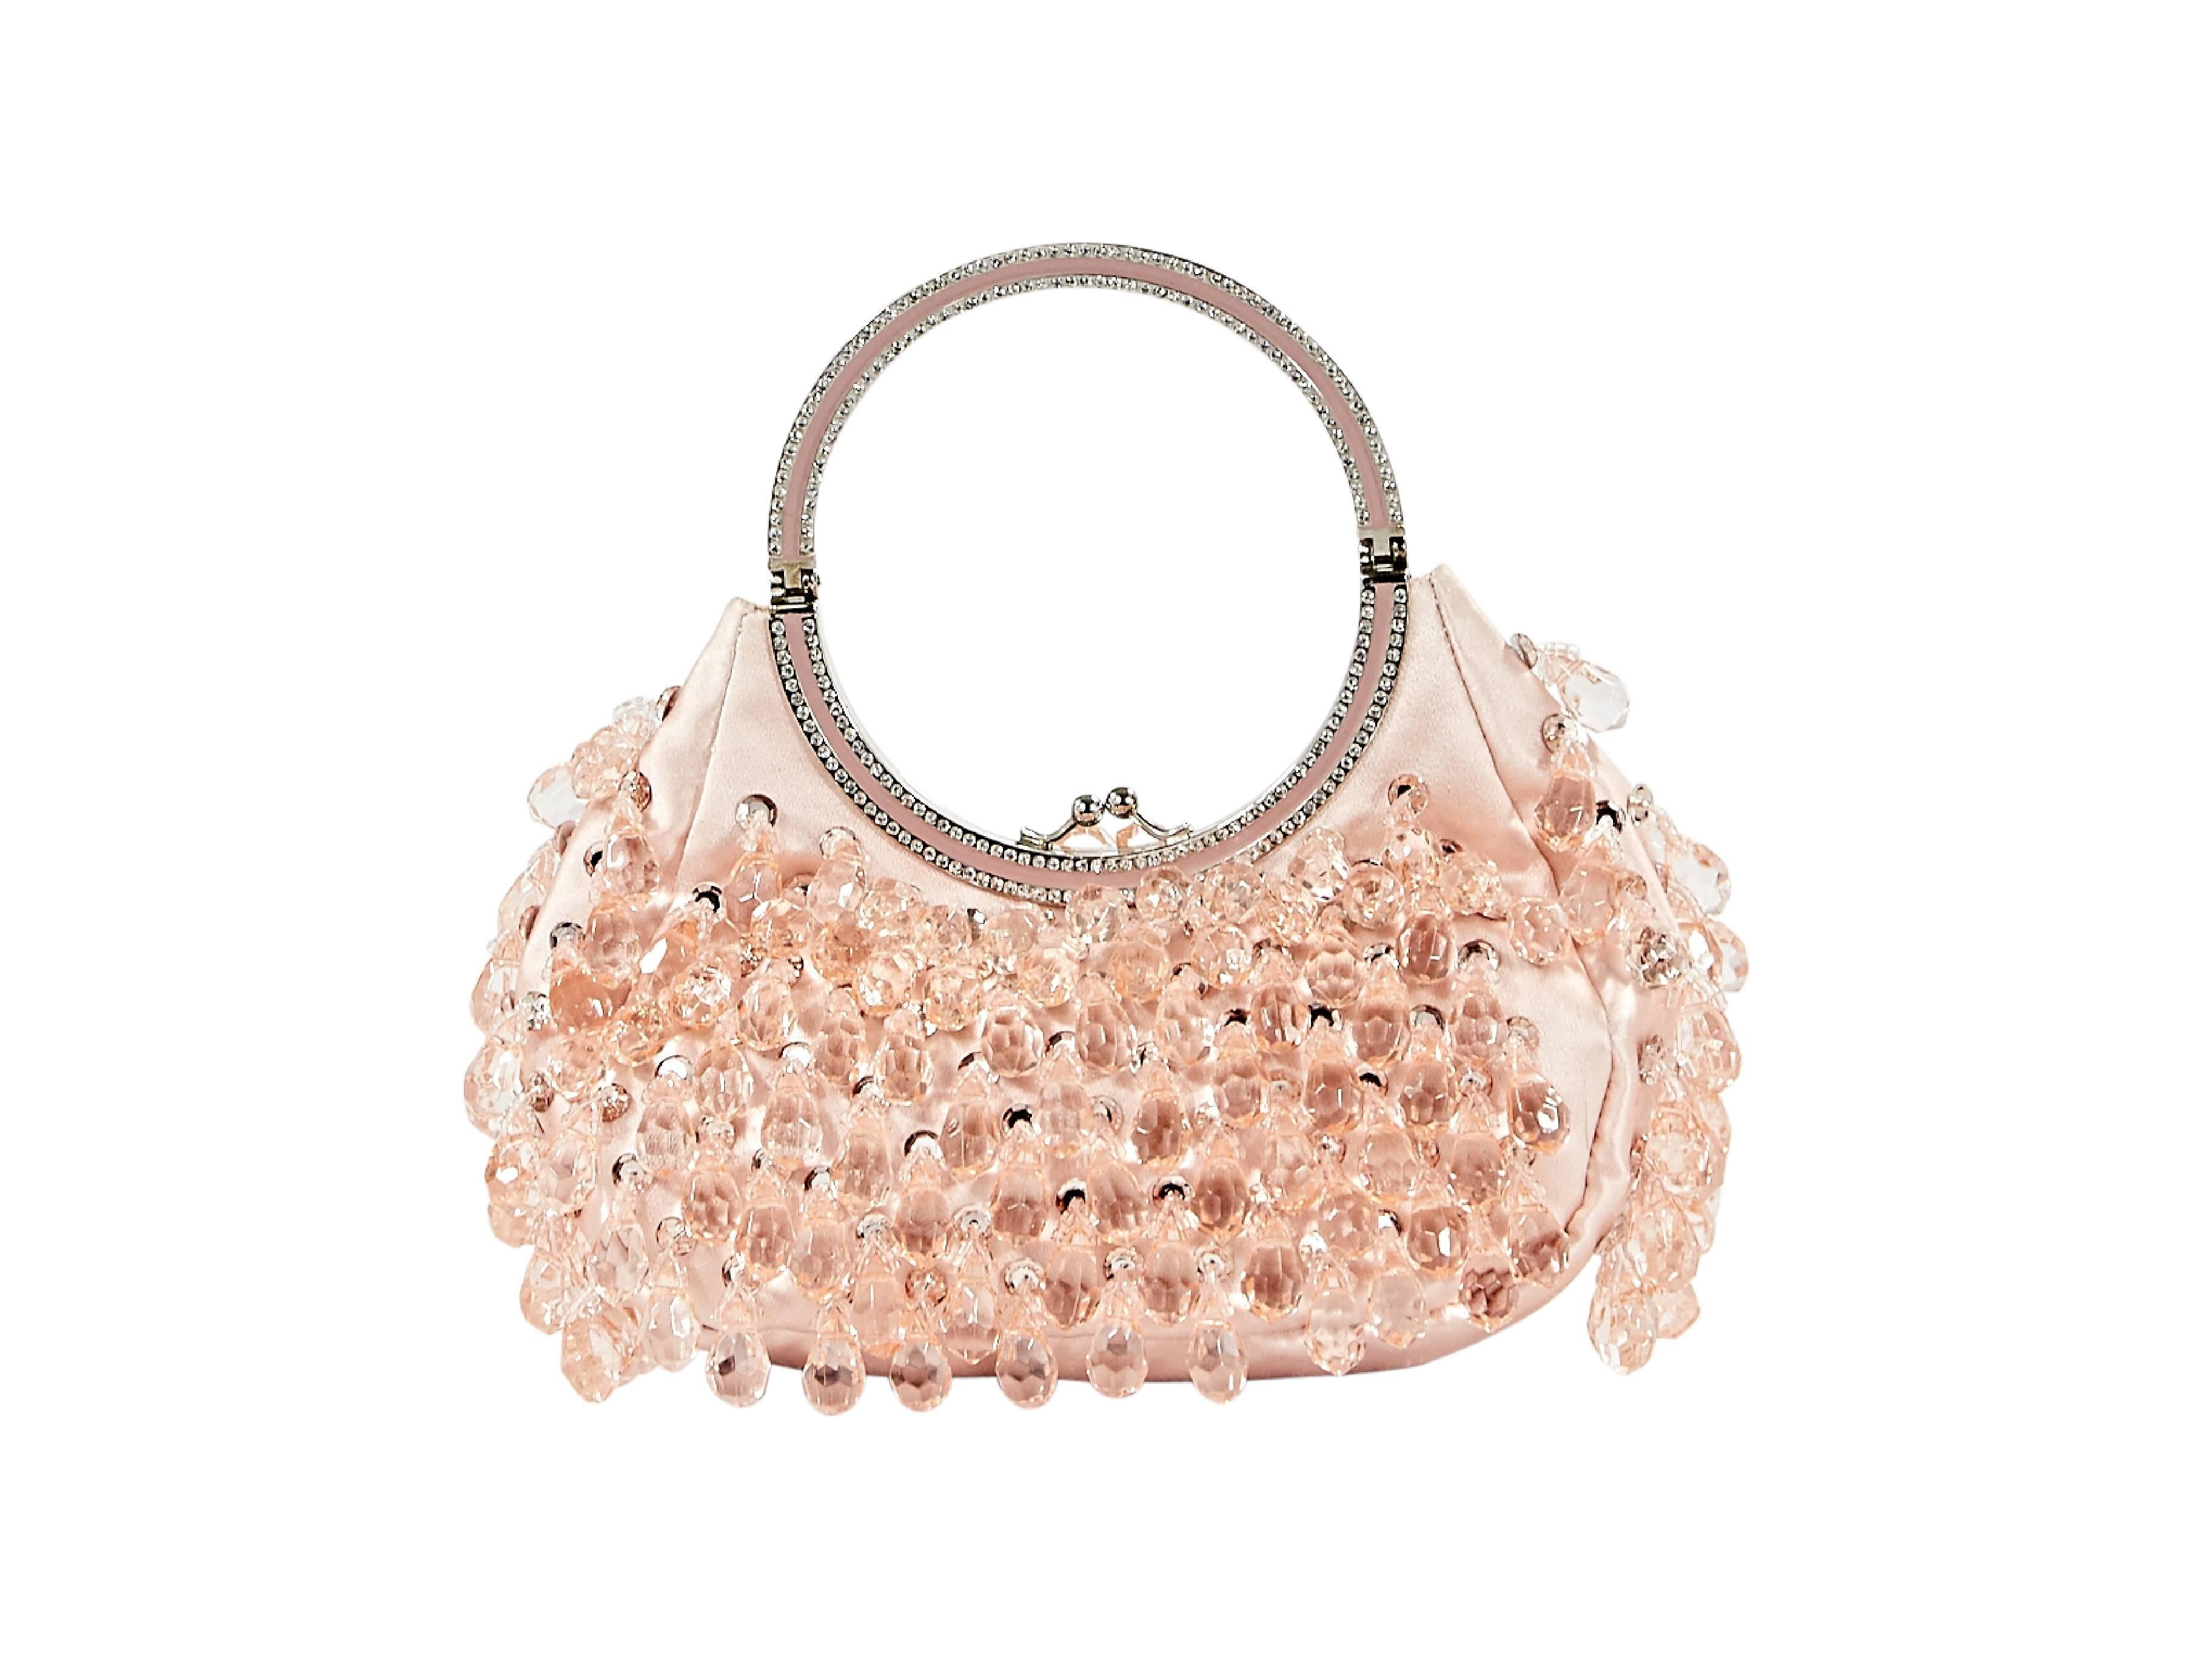 Peach satin handbag by Valentino.  Embellished with faceted teardrop crystals.  Kiss-lock closure.  Silvertone hardware. Includes dust bag & box.